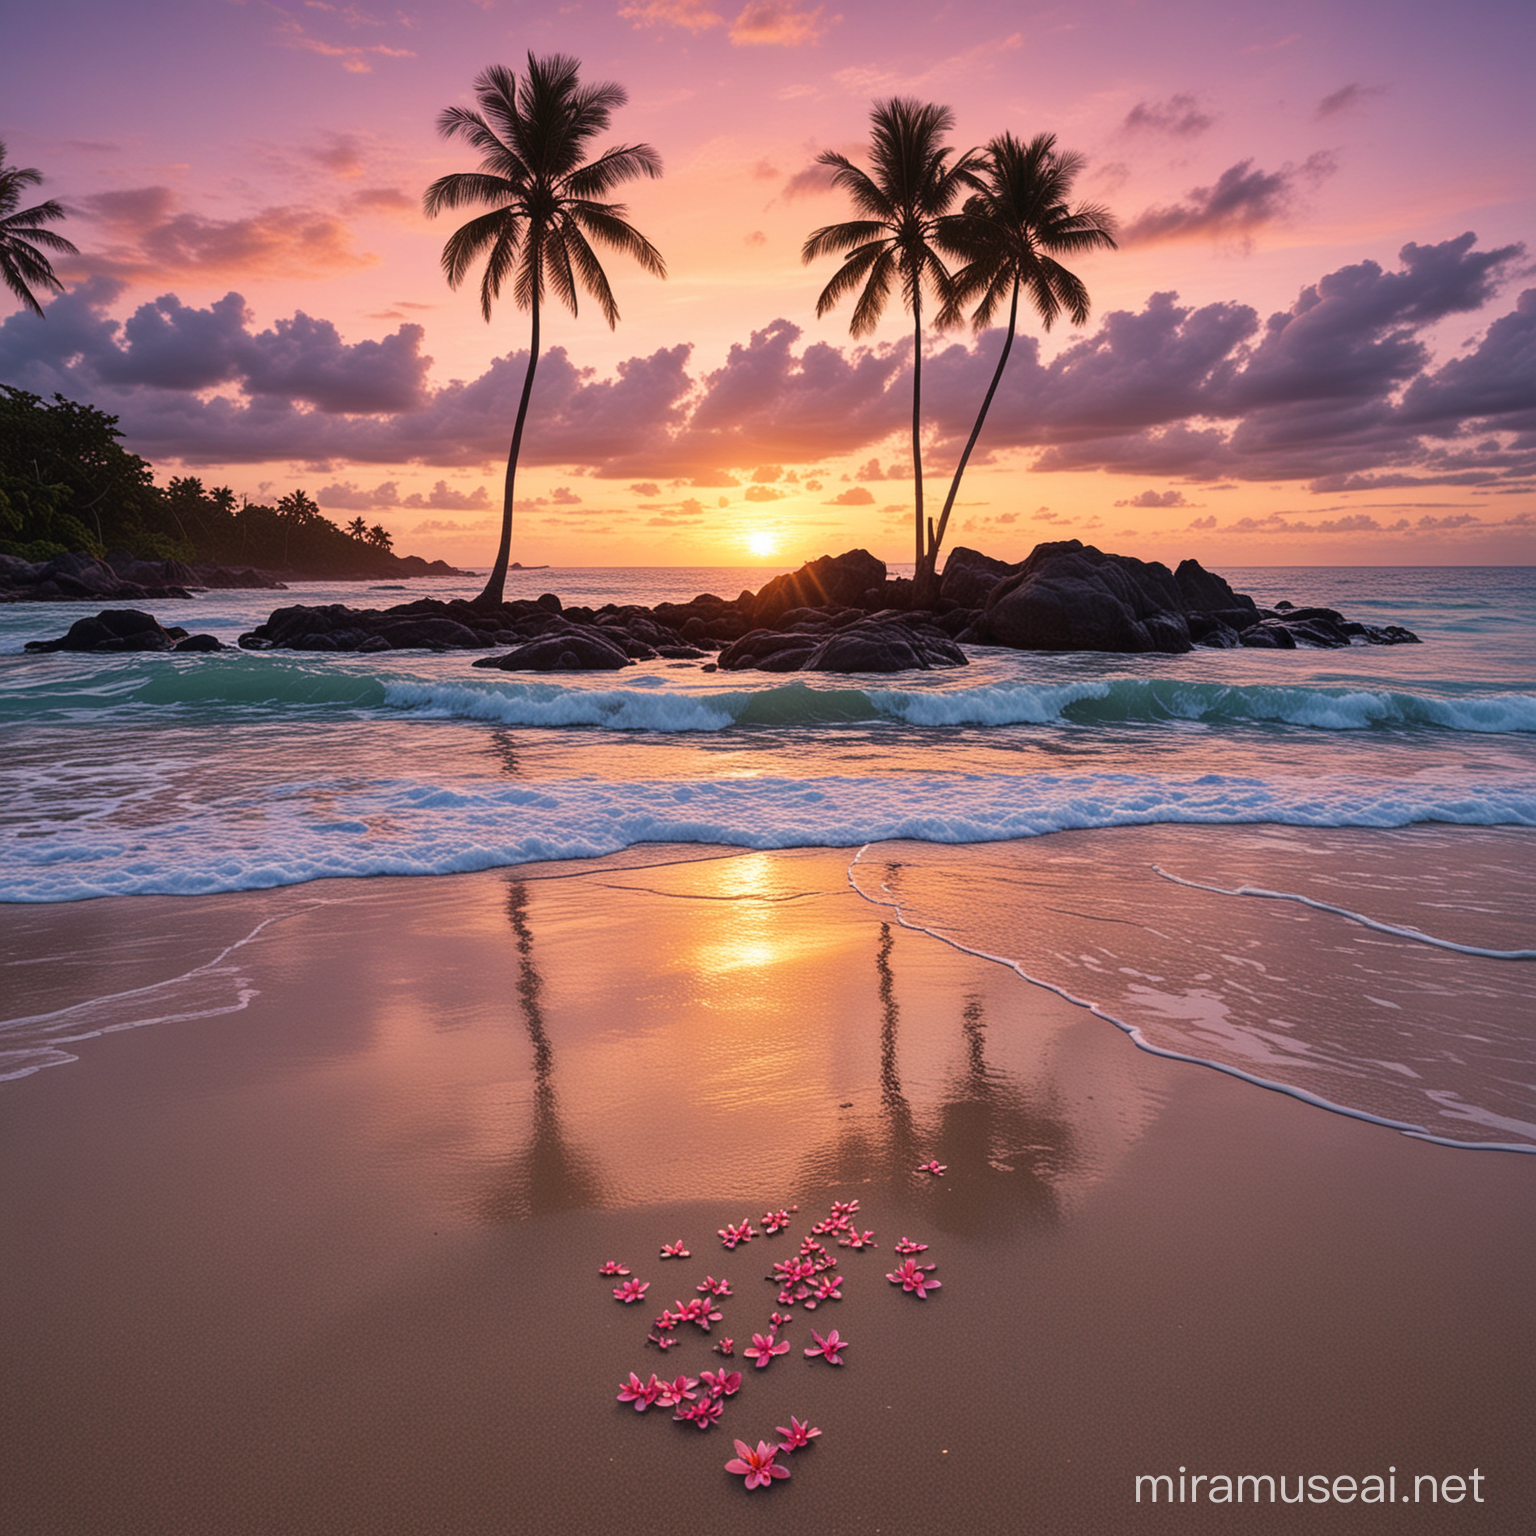 Tranquil Sunset Beach with Coconut Palm Trees and Frangipani Flowers